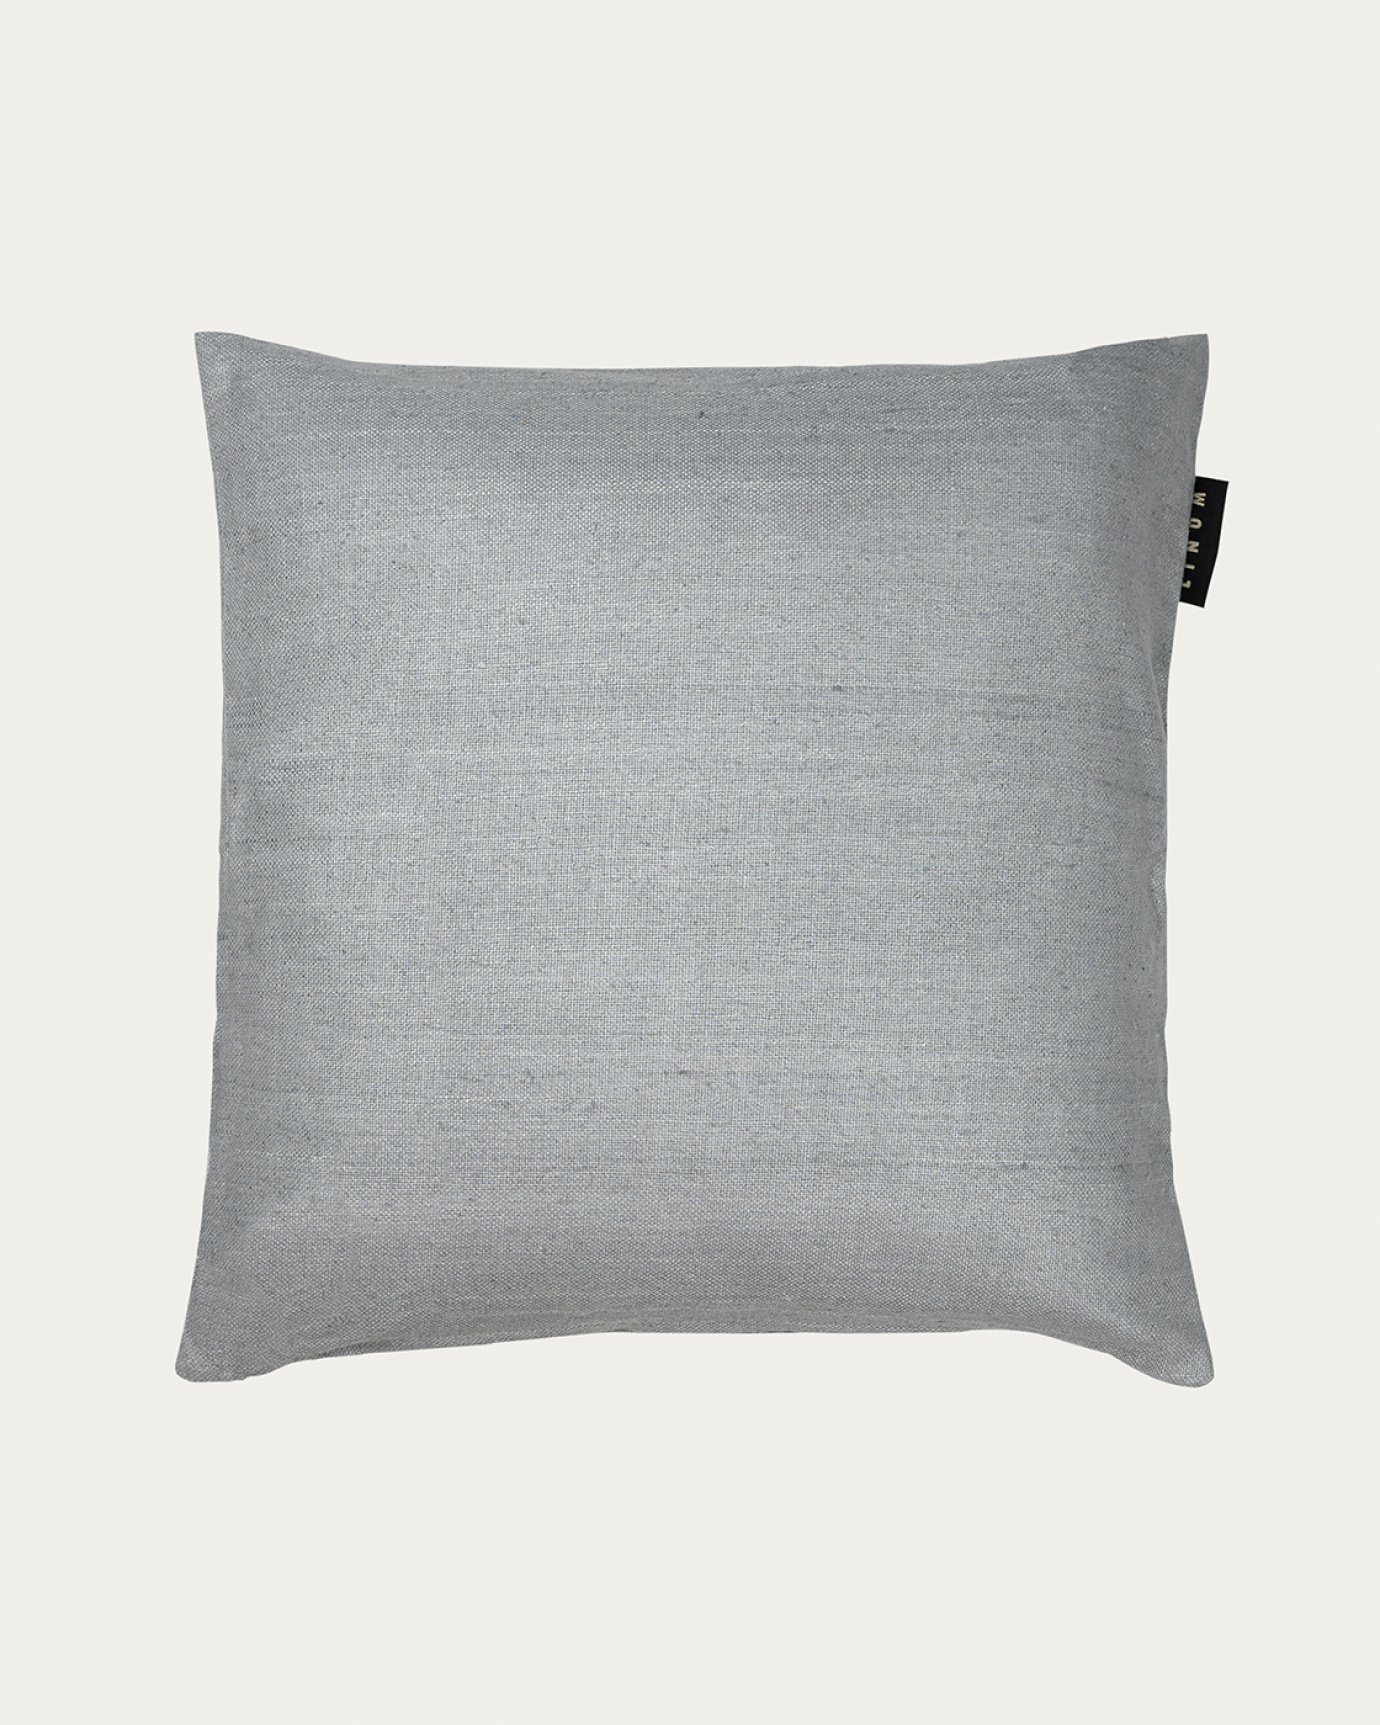 Product image light stone grey SETA cushion cover made of 100% raw silk that gives a nice lustre from LINUM DESIGN. Size 50x50 cm.